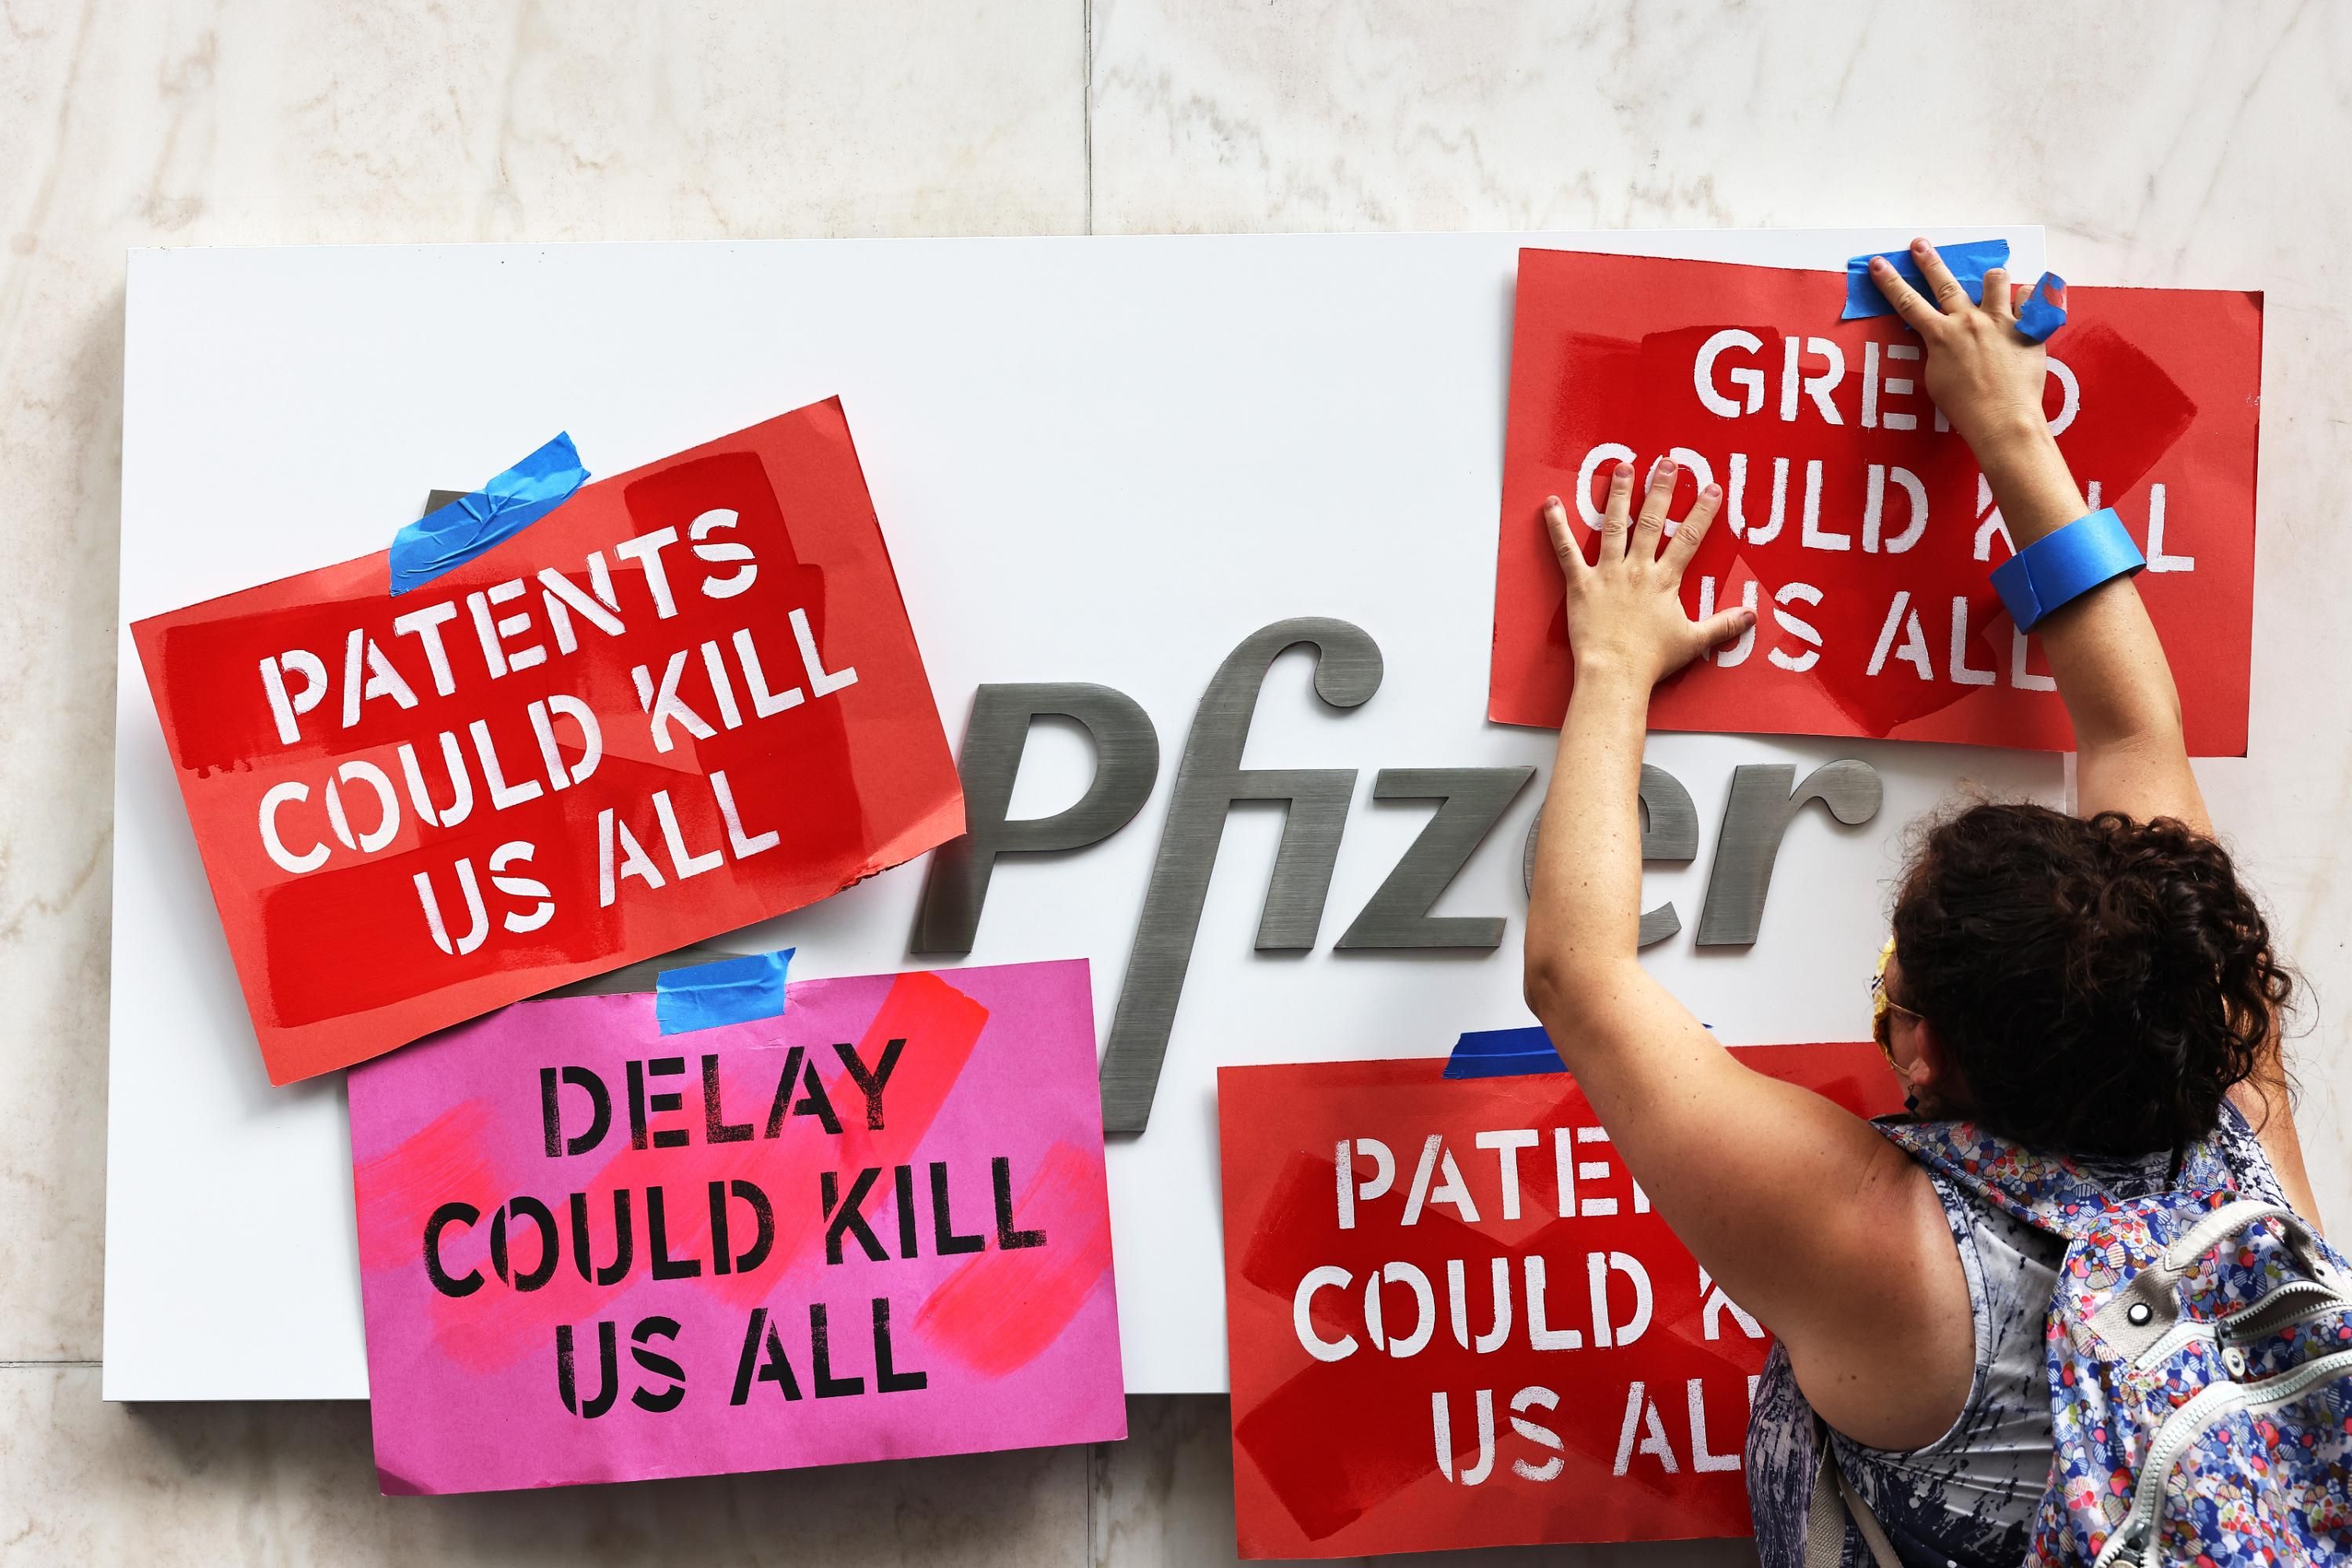 A demonstrator attaches signs to the Pfizer logo